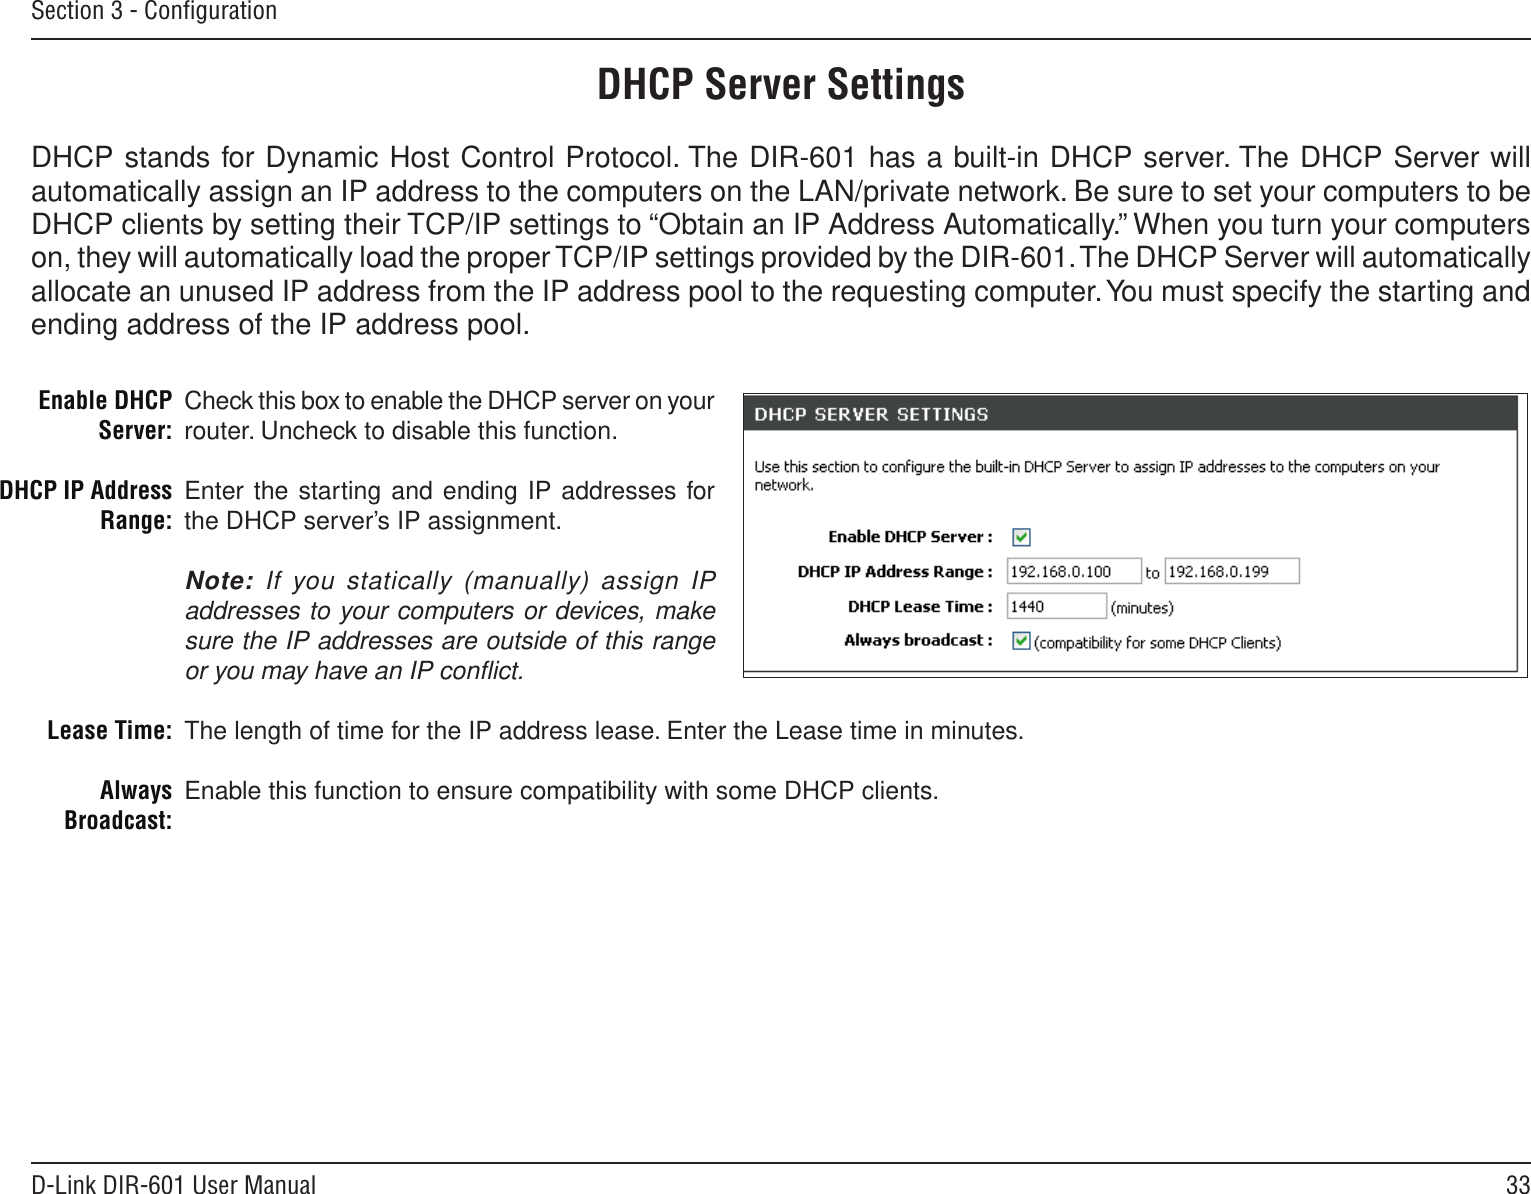 33D-Link DIR-601 User ManualSection 3 - ConﬁgurationCheck this box to enable the DHCP server on your router. Uncheck to disable this function.Enter the starting and ending IP addresses for the DHCP server’s IP assignment.Note: If you statically (manually) assign IP addresses to your computers or devices, make sure the IP addresses are outside of this range or you may have an IP conﬂict. The length of time for the IP address lease. Enter the Lease time in minutes.Enable this function to ensure compatibility with some DHCP clients.Enable DHCP Server:DHCP IP Address Range:Lease Time:Always Broadcast:DHCP Server SettingsDHCP stands for Dynamic Host Control Protocol. The DIR-601 has a built-in DHCP server. The DHCP Server will automatically assign an IP address to the computers on the LAN/private network. Be sure to set your computers to be DHCP clients by setting their TCP/IP settings to “Obtain an IP Address Automatically.” When you turn your computers on, they will automatically load the proper TCP/IP settings provided by the DIR-601. The DHCP Server will automatically allocate an unused IP address from the IP address pool to the requesting computer. You must specify the starting and ending address of the IP address pool.